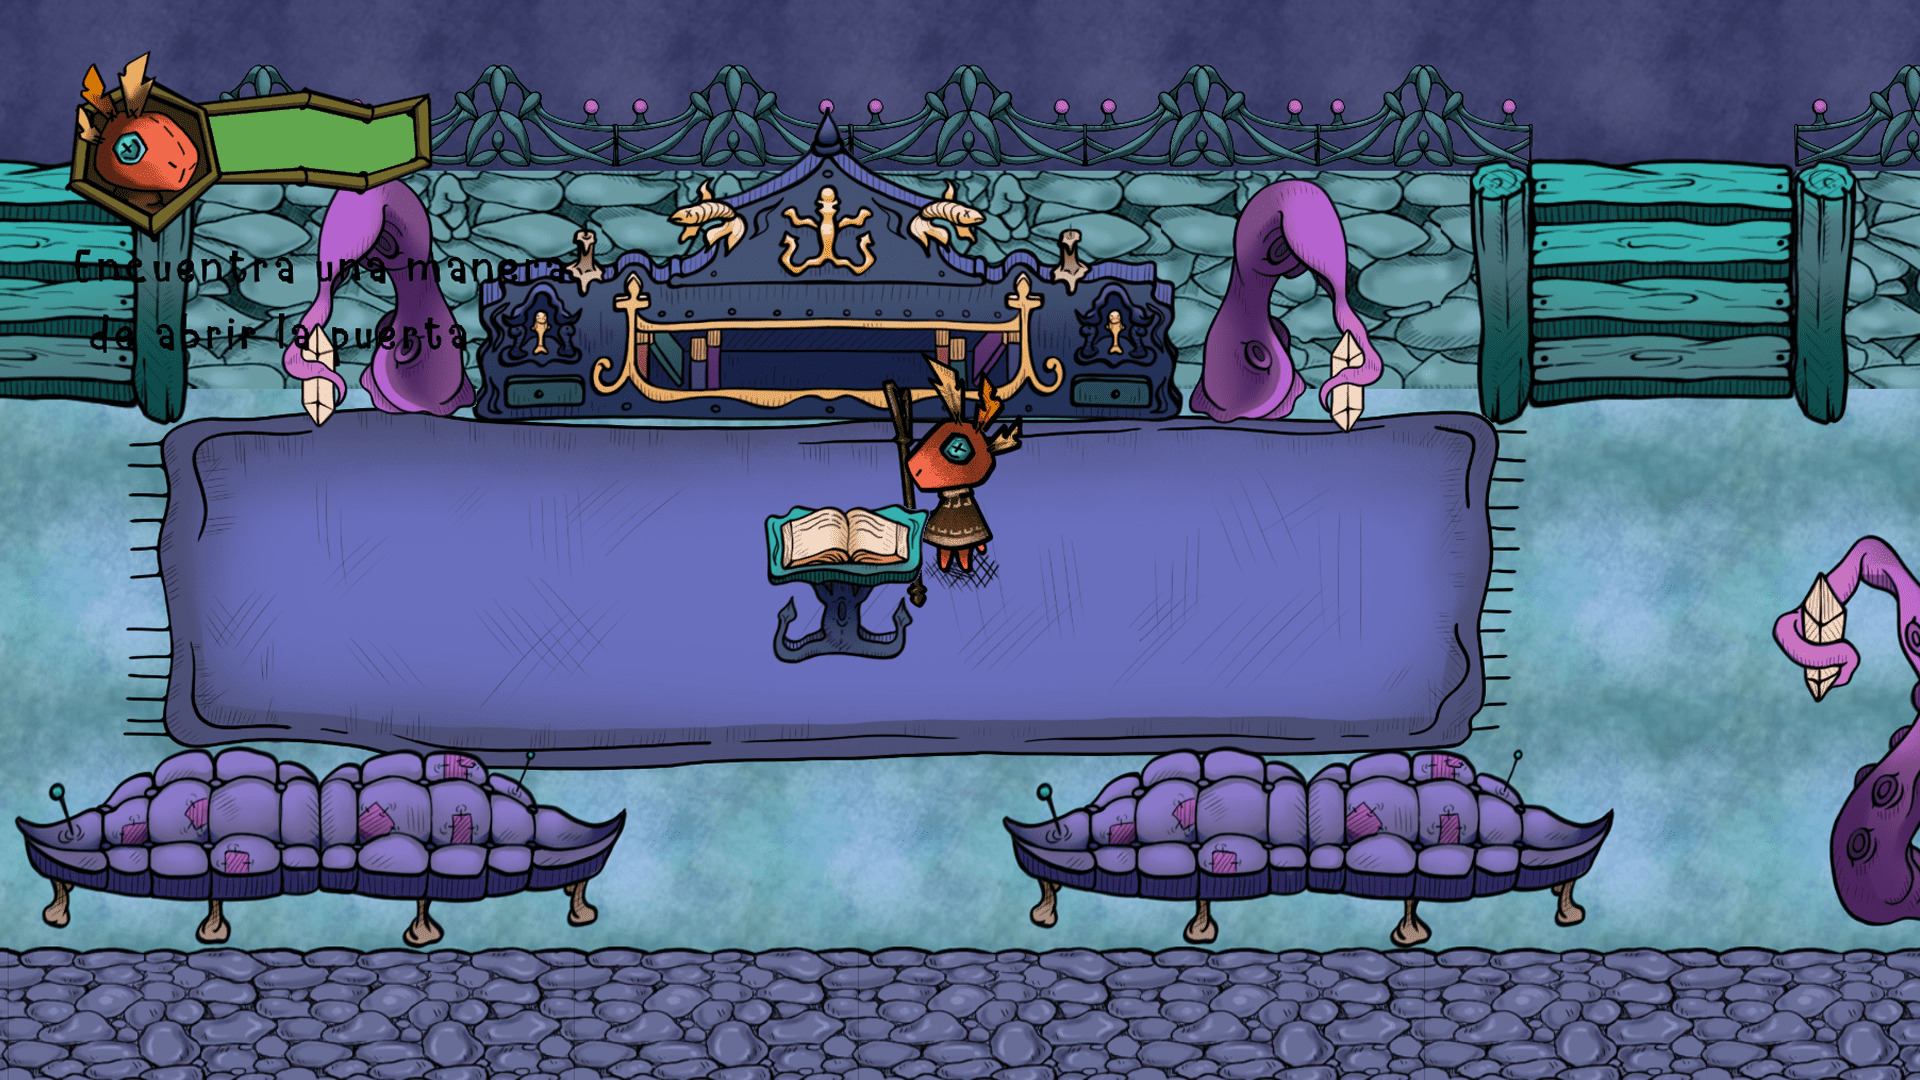 The protagonist, Hector, is presented with a riddle; he must find a way to open the door in a fantastical purple-colored world.